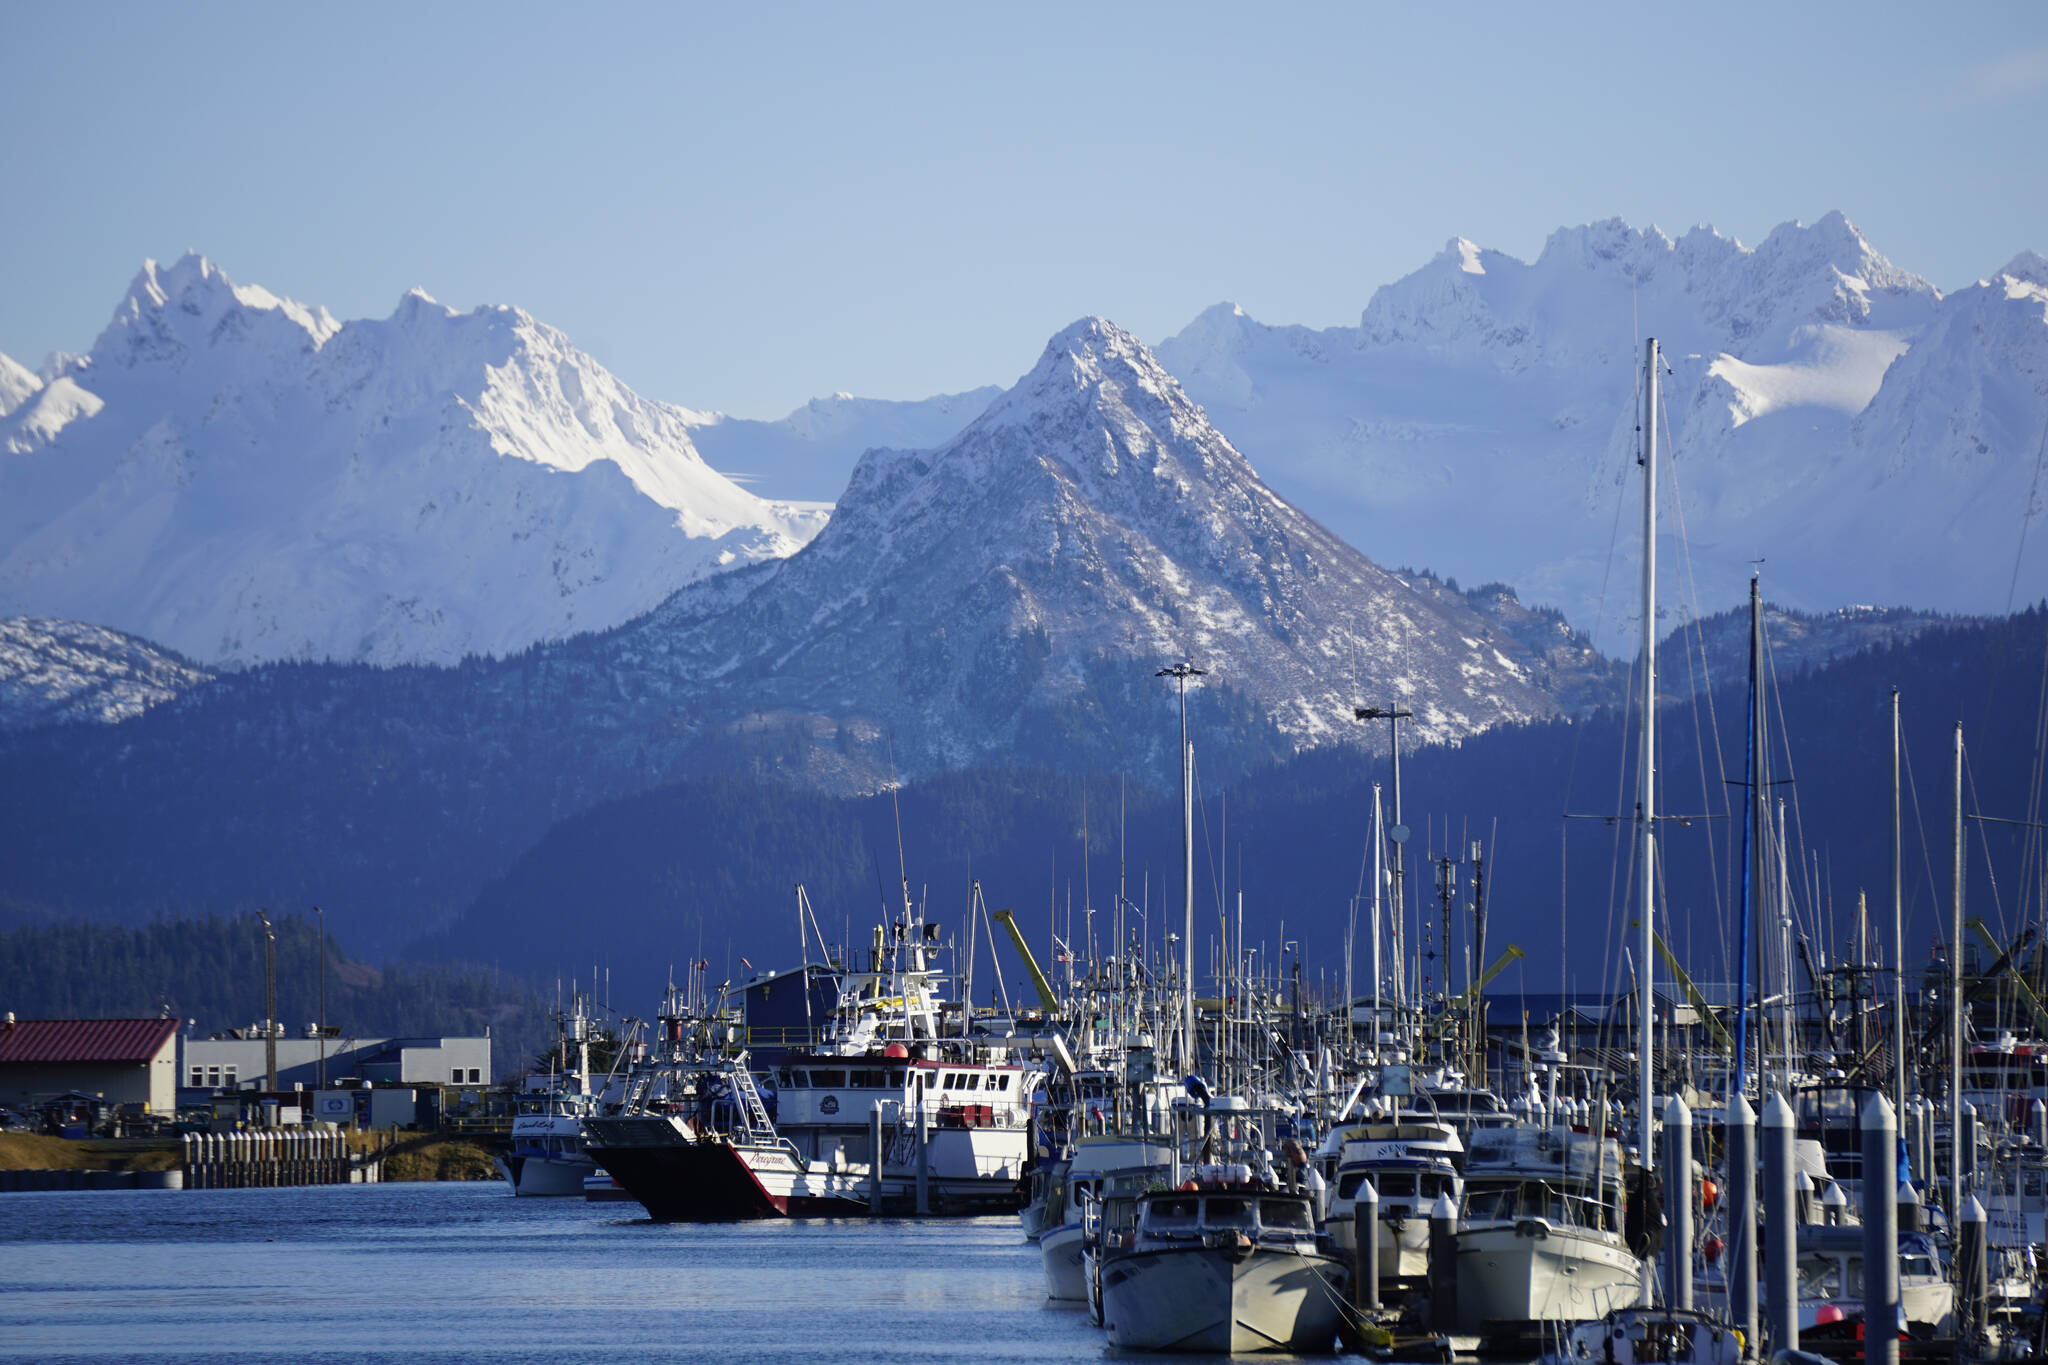 Snow has fallen on the higher elevations of Poot Peak and the Kenai Mountains, as seen from the Homer Harbor on Friday, Nov. 5, 2021, in Homer, Alaska. The snow also makes visible the image of the bear on the side of Poot Peak. Poot Peak and China Poot Bay were named for Henry "China" Poot. According to Janet Klein's "A History of Kachemak Bay," she wrote that Clem Tillion said Poot was an Alaska Native of mixed heritage who associated with Chinese workers in the area who packed salmon. Poot's nickname was "China." (Photo by Michael Armstrong/Homer News)